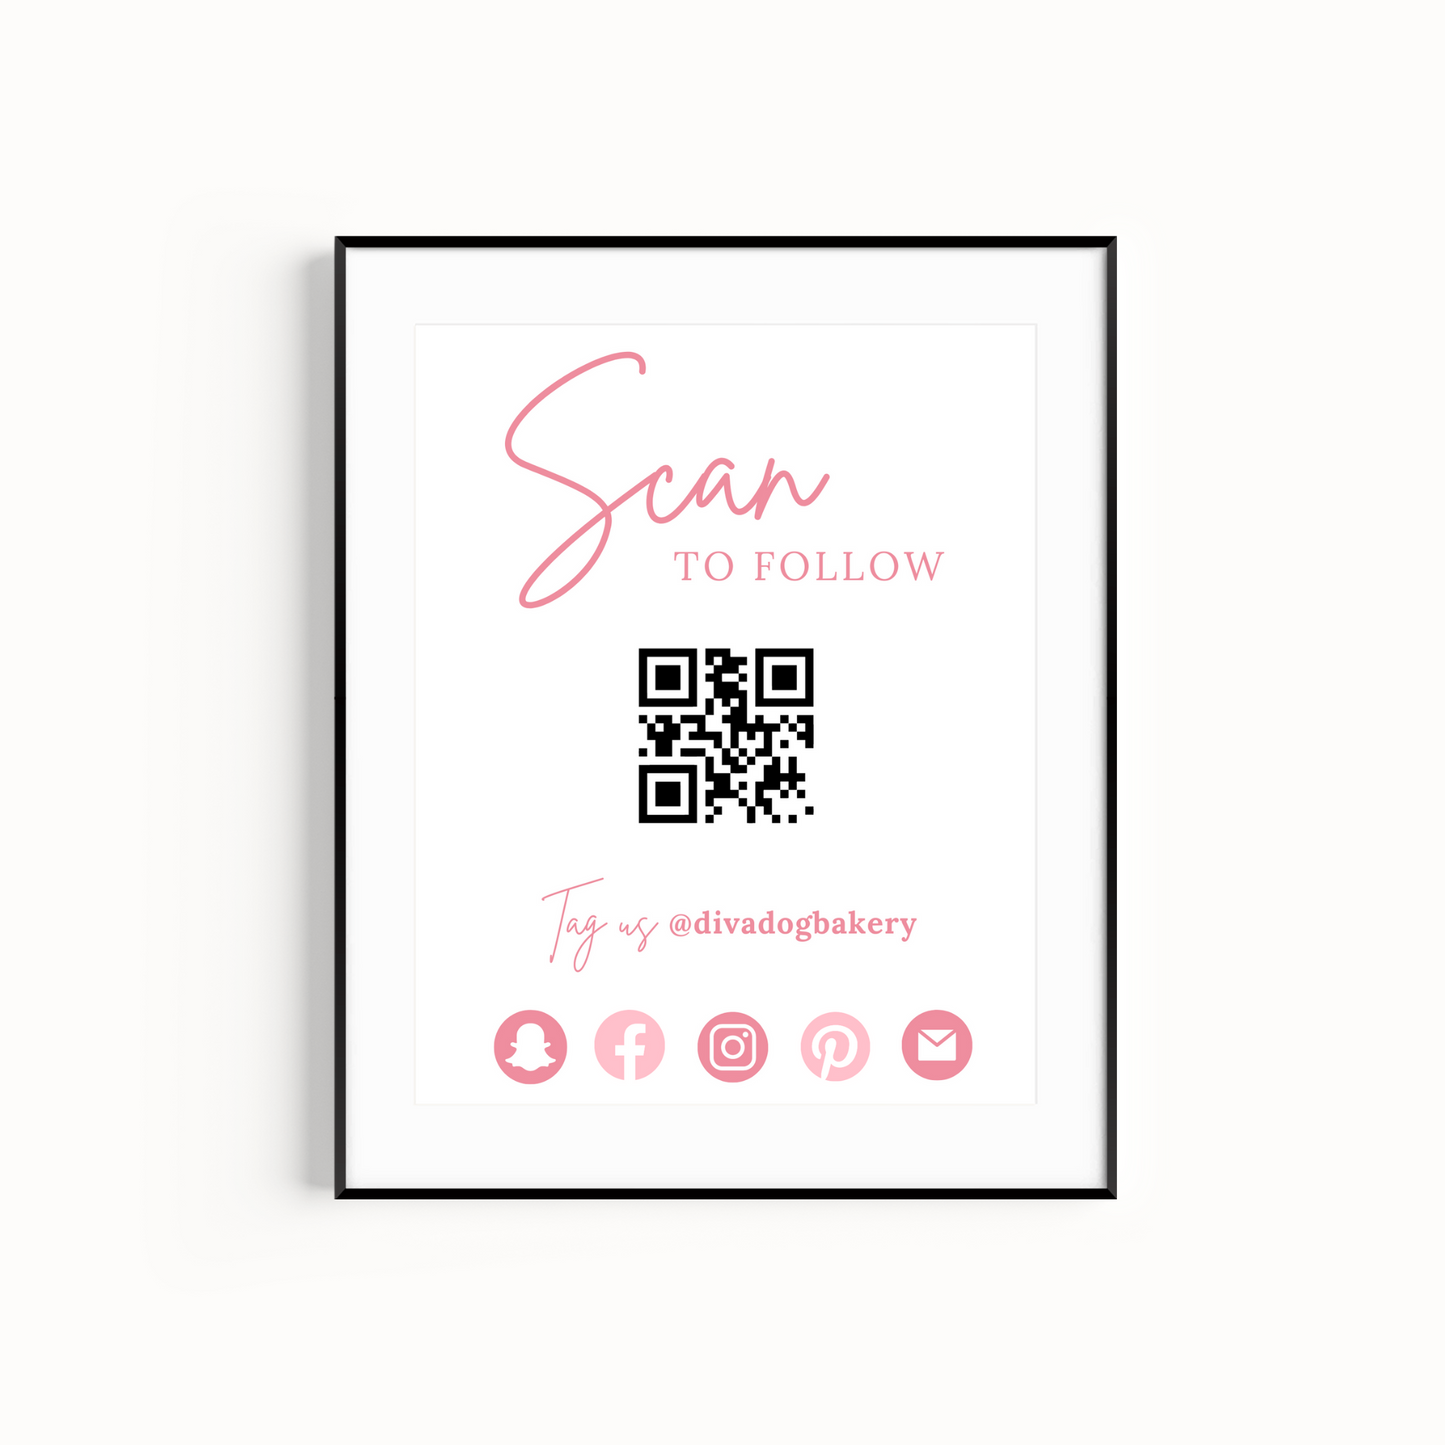 Connect With Us QR Code